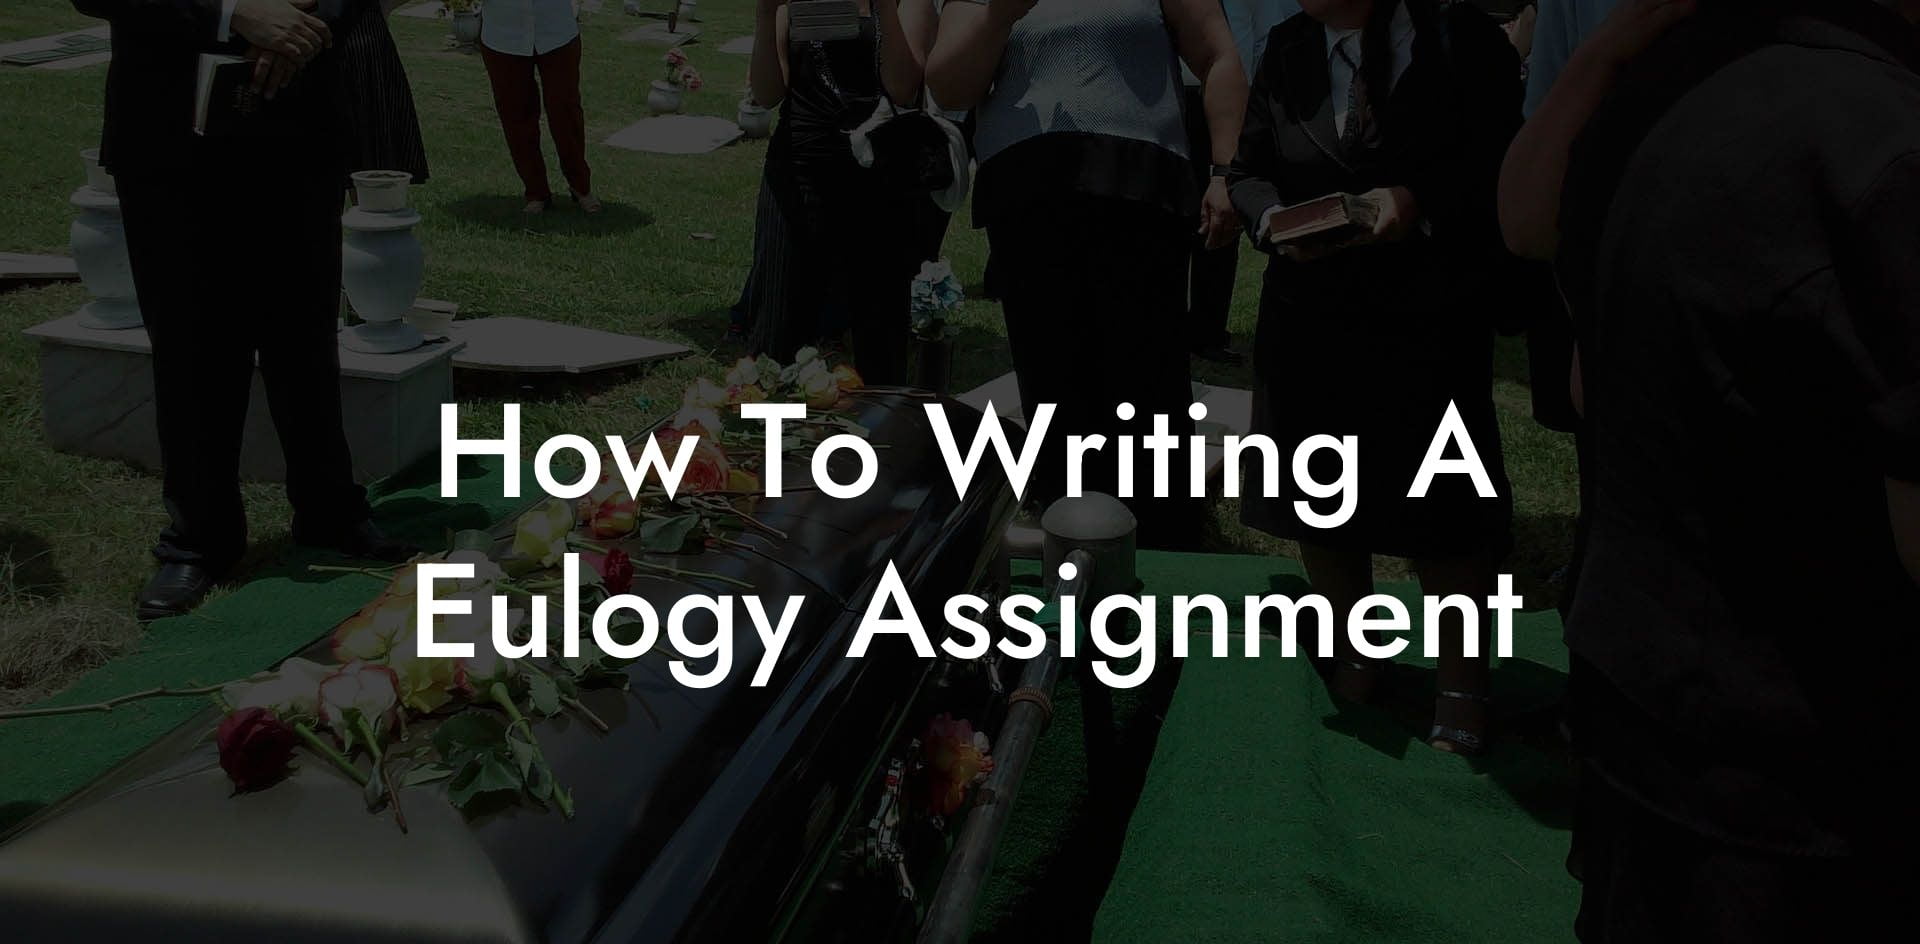 How To Writing A Eulogy Assignment